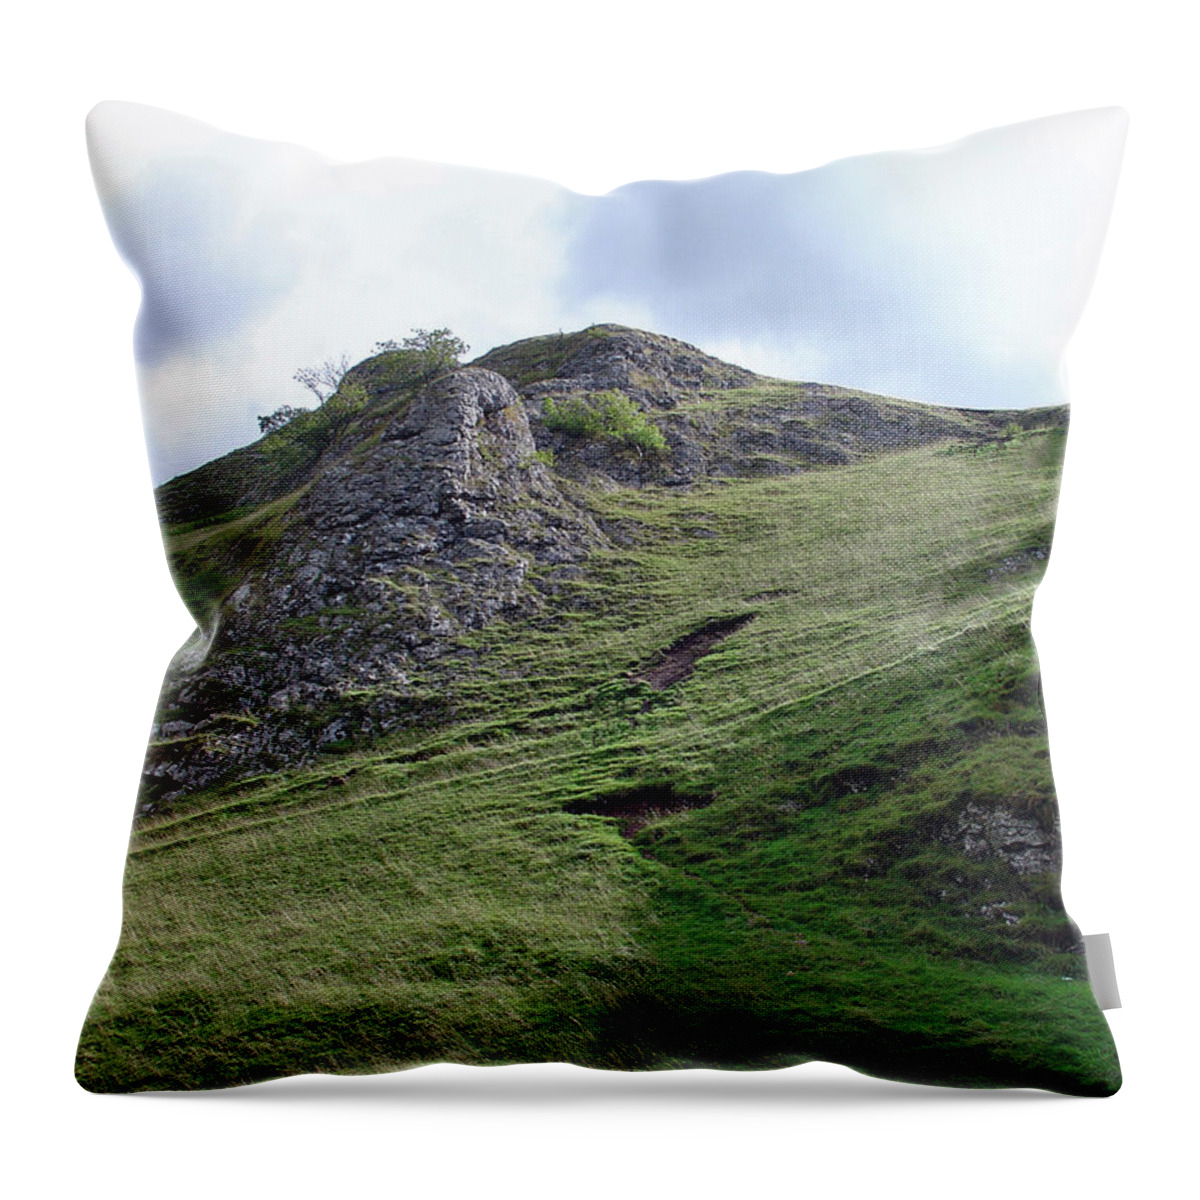 Bright Throw Pillow featuring the photograph Grassy Slopes of Thorpe Cloud by Rod Johnson